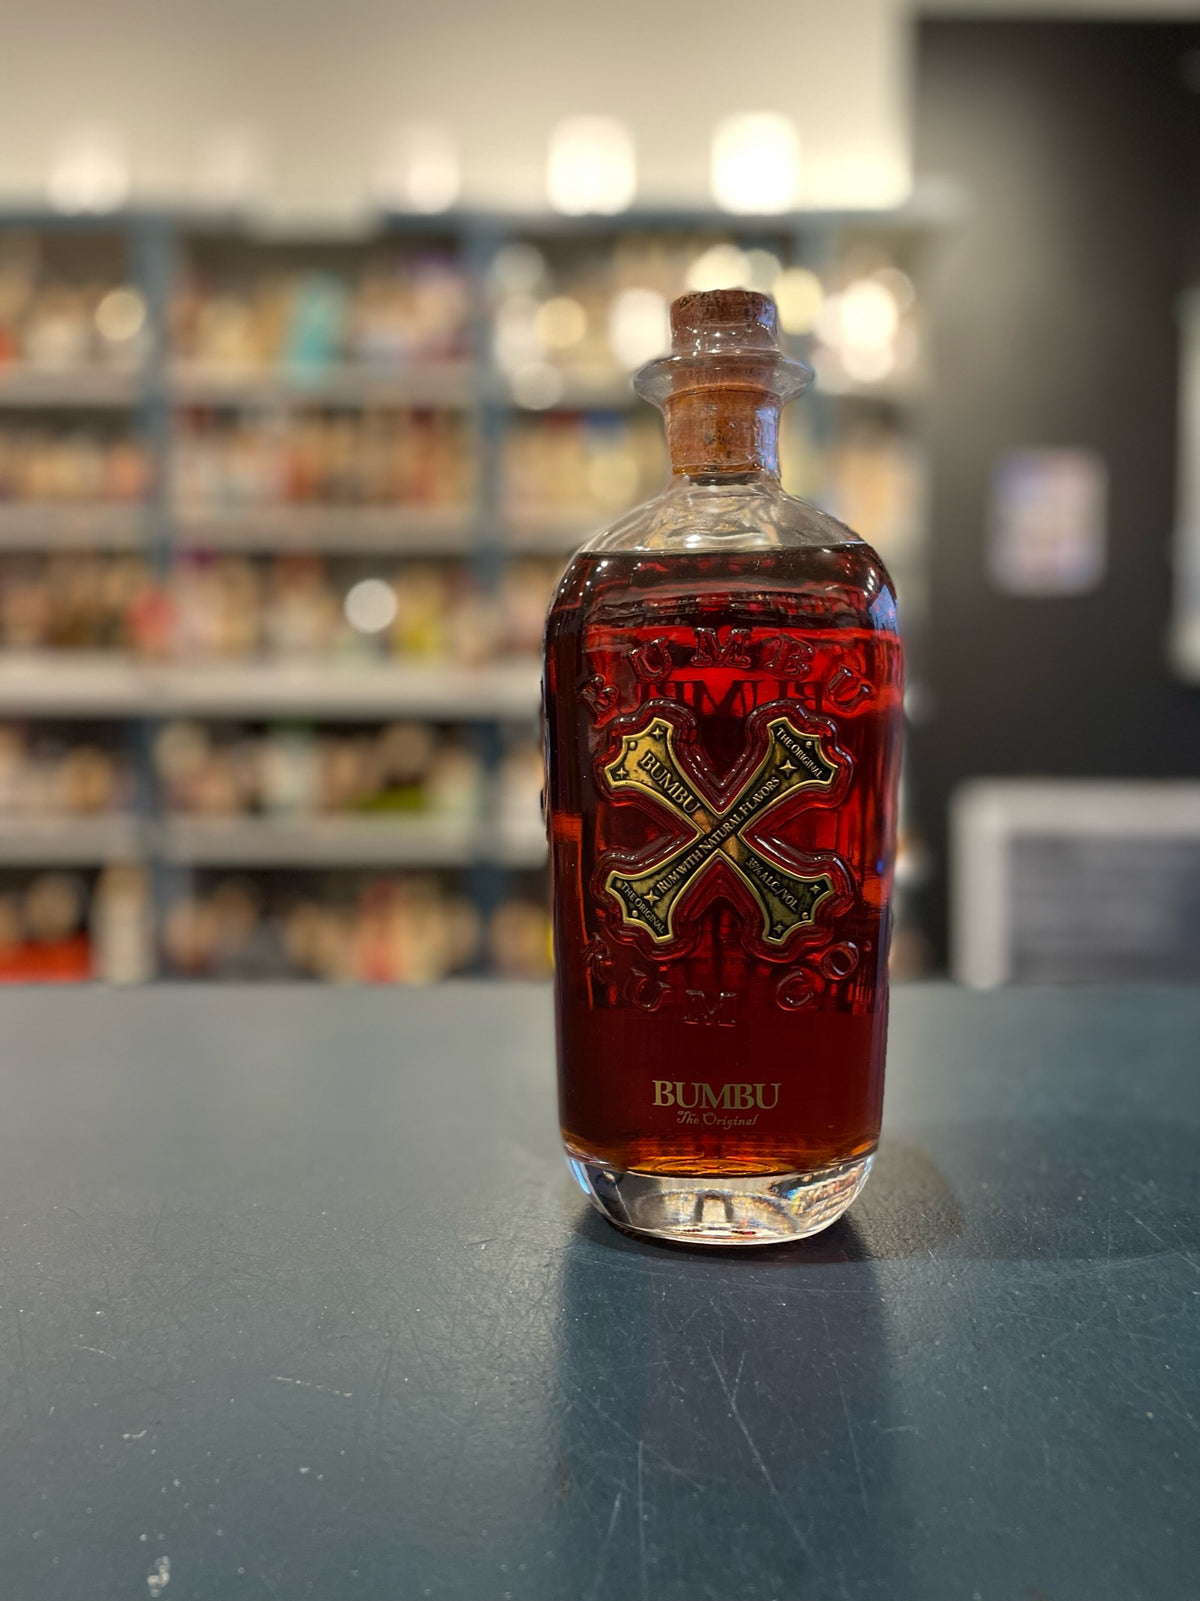 Bumbu Rum Complete Collection